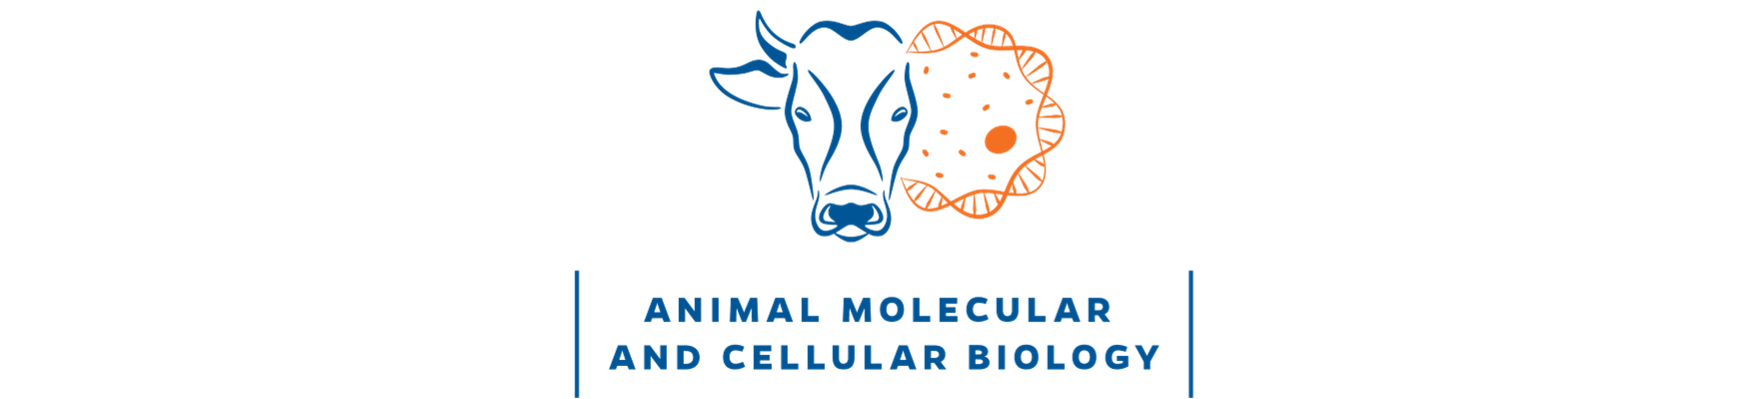 Animal Molecular & Cellular Biology Graduate Program - University of  Florida, Institute of Food and Agricultural Sciences - UF/IFAS